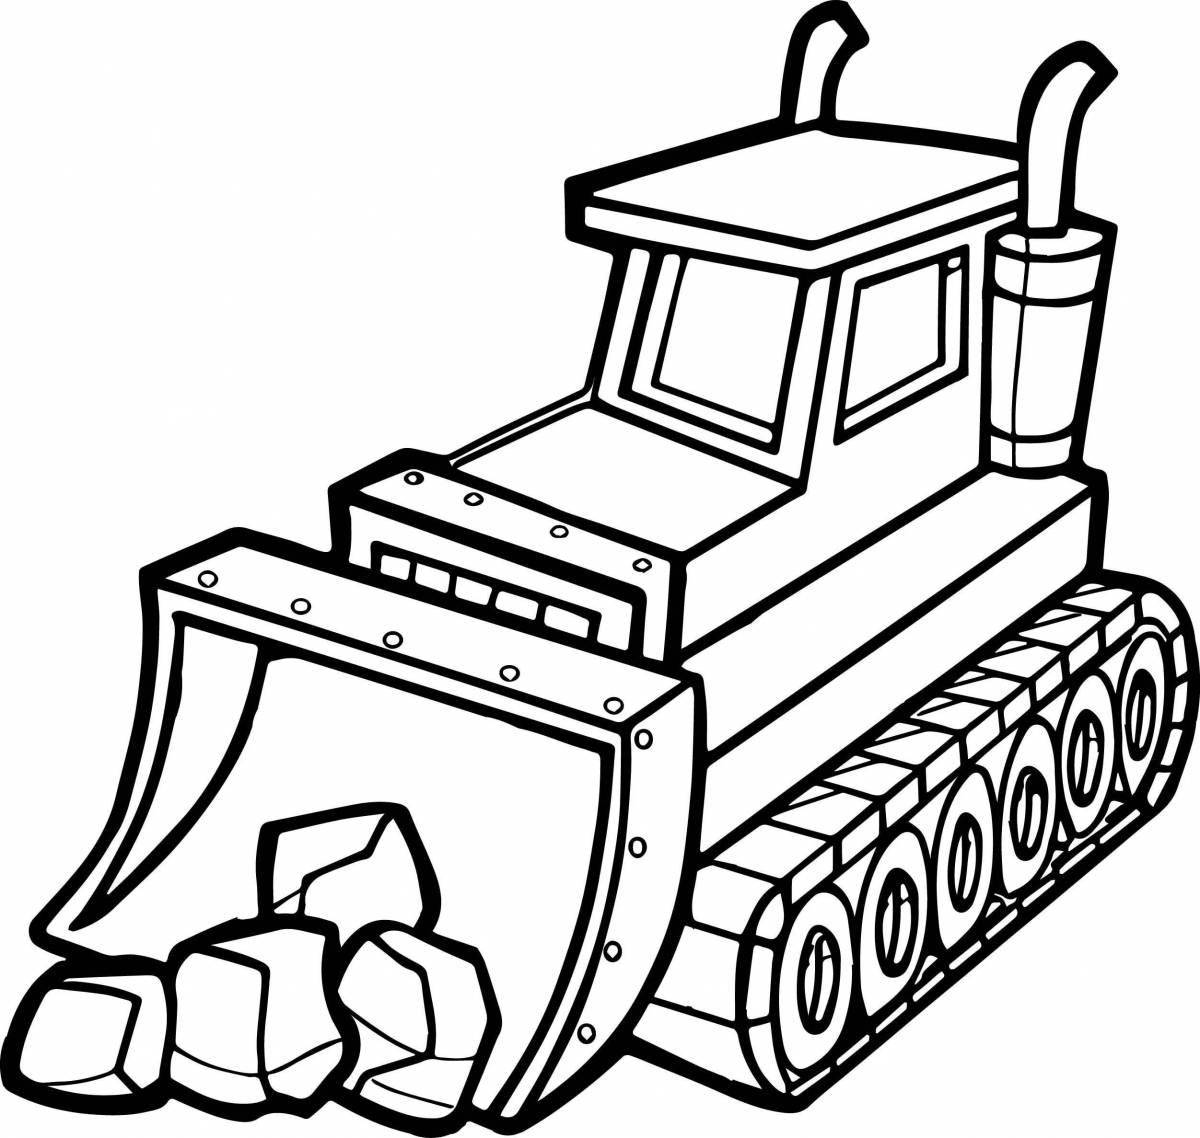 Cute construction machinery coloring page